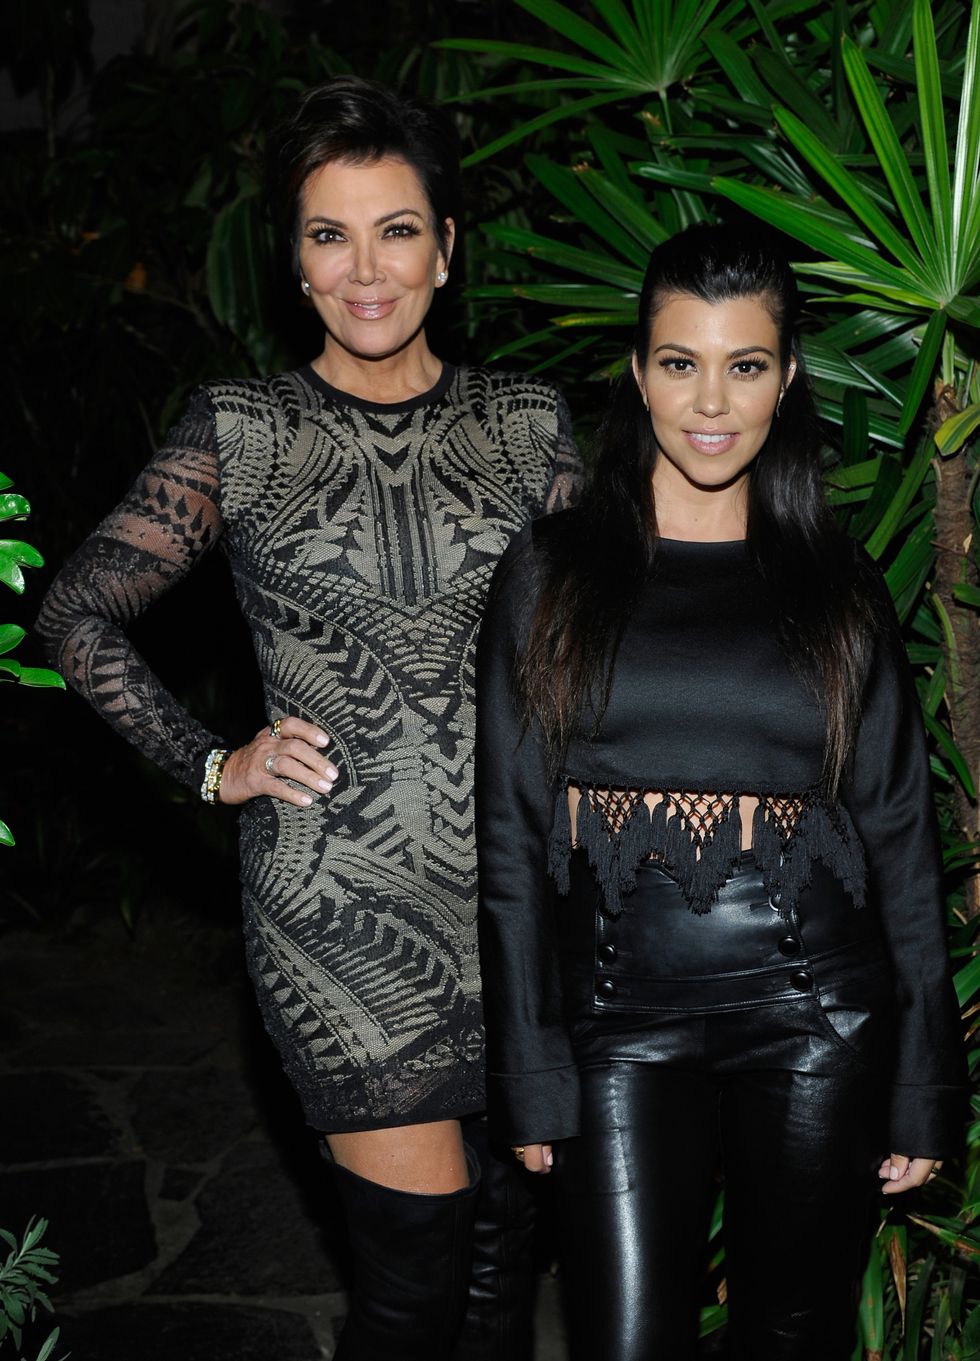 LOS ANGELES, CA - APRIL 23:  TV personalities Kris Jenner (L) and Kourtney Kardashian attend Opening Ceremony and Calvin Klein Jeans' celebration launch of the #mycalvins Denim Series with special guest Kendall Jenner at Chateau Marmont on April 23, 2015 in Los Angeles, California.  (Photo by John Sciulli/Getty Images for Calvin Klein)